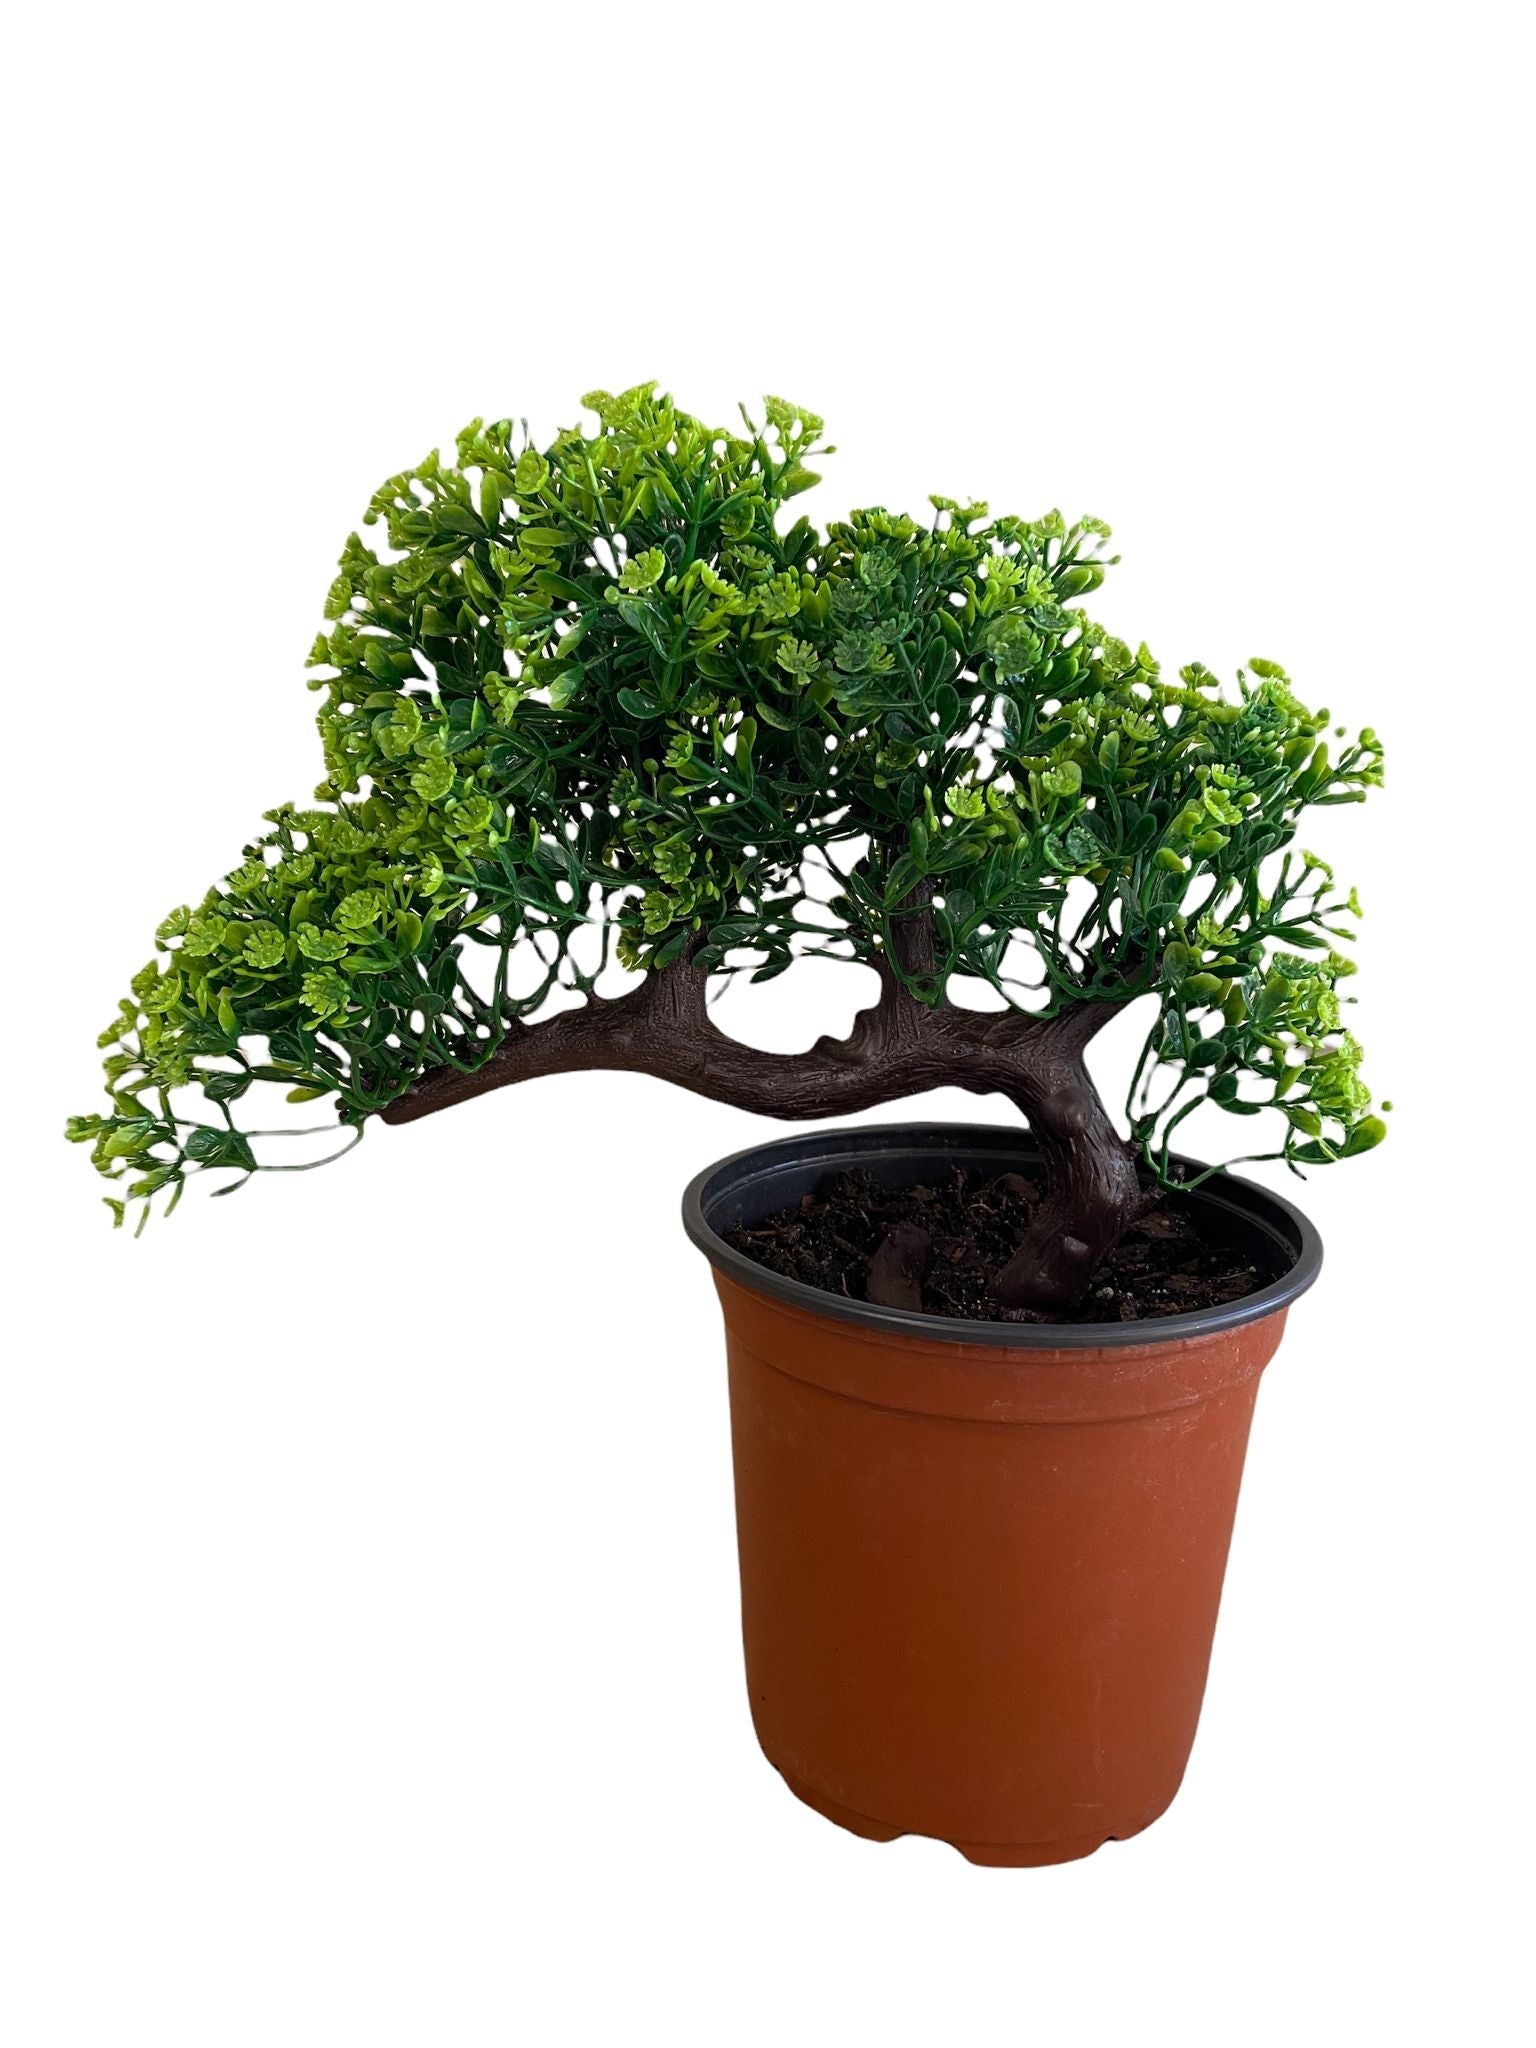 Gorgeous Bonsai with Very Attractive Pot